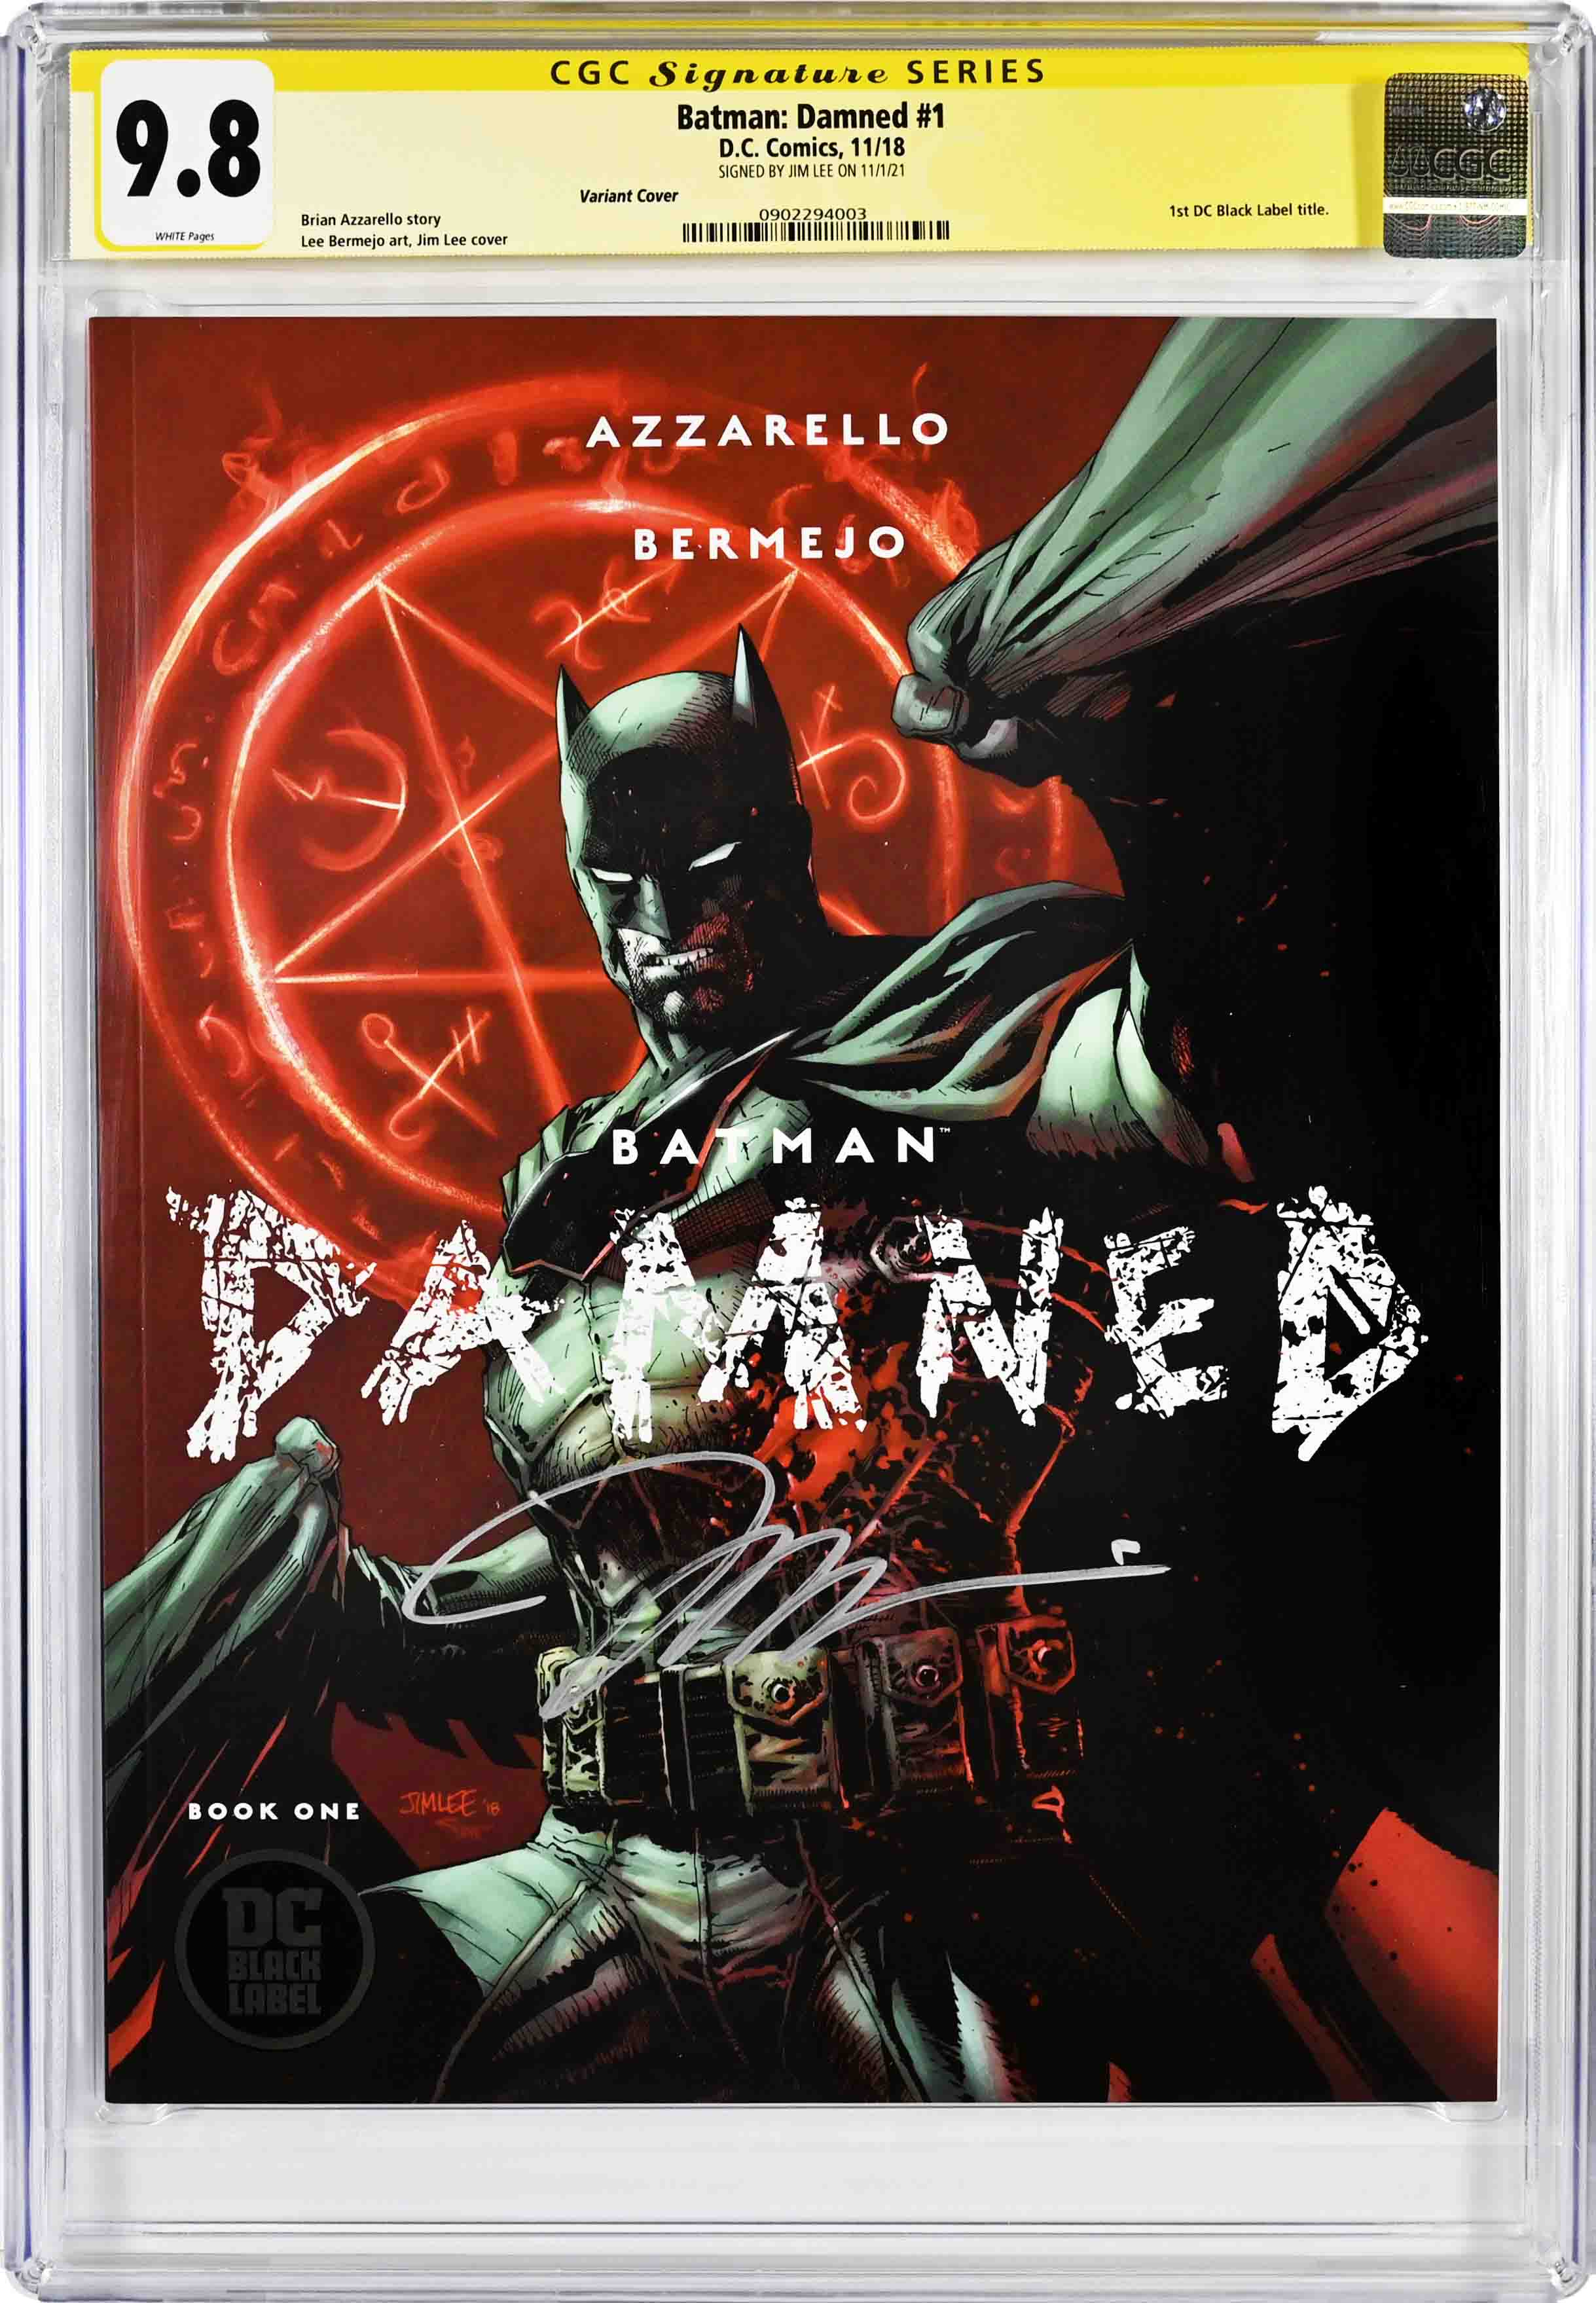 BATMAN DAMNED #1-3 VARIANT CGC SS,  COMPLETE SET,SIGNED in SILVER INK by  JIM LEE,1st PRINTS,UNCUT,CGC SET!